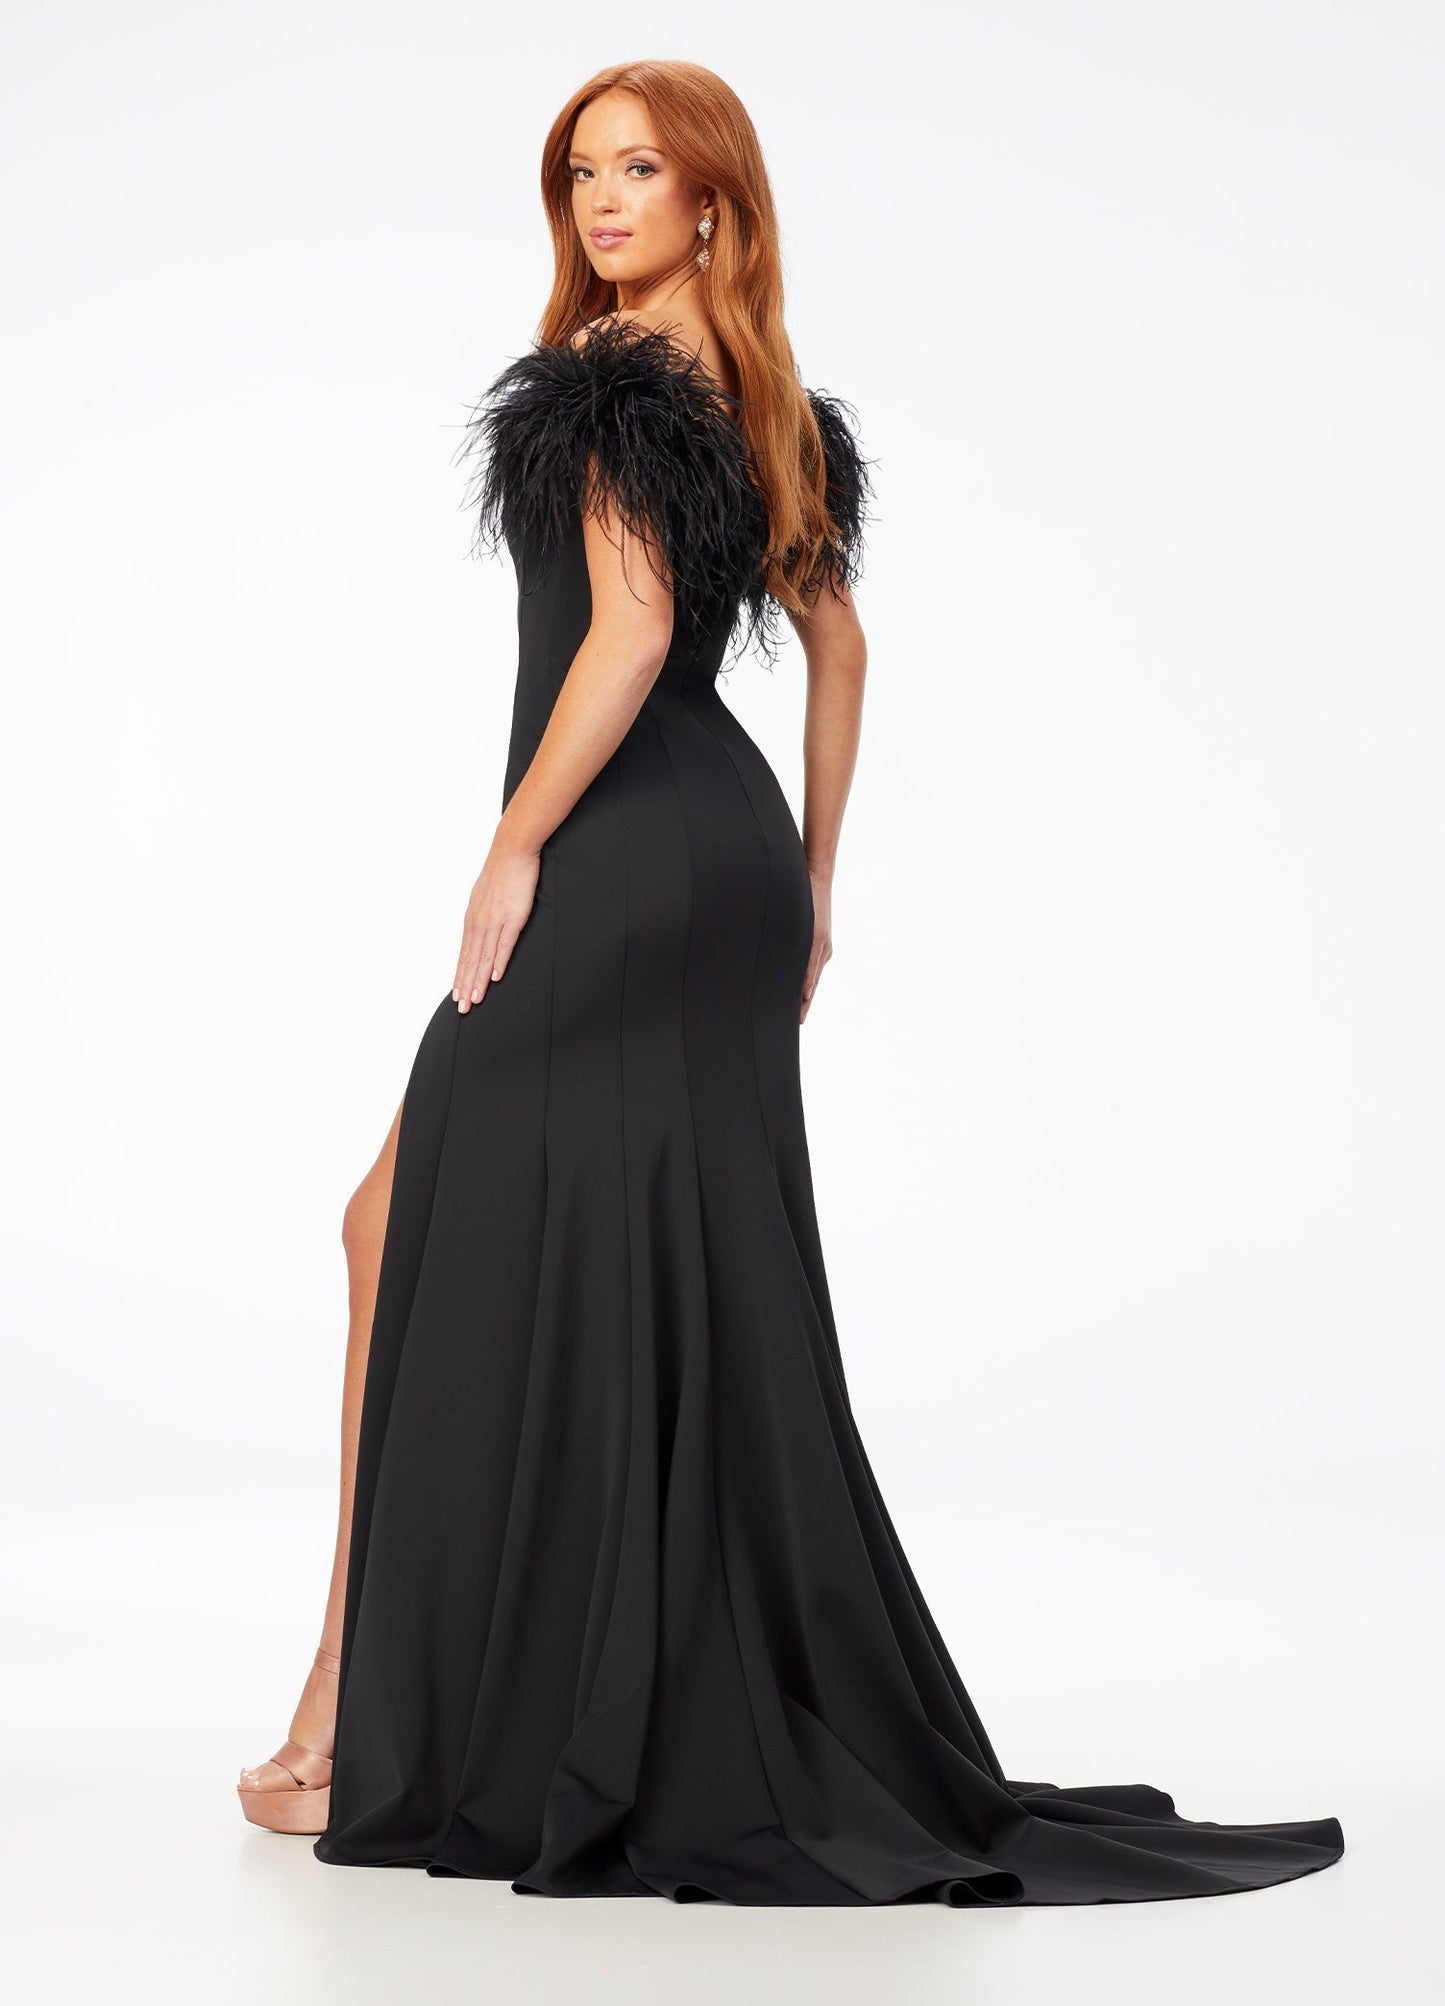 Ashley Lauren 11100 Feather trimmed Jumpsuit. This jumpsuit features a feather boa wrapped around your neckline, arms and back.  The fabric is scuba and it has flare in the pant leg. black